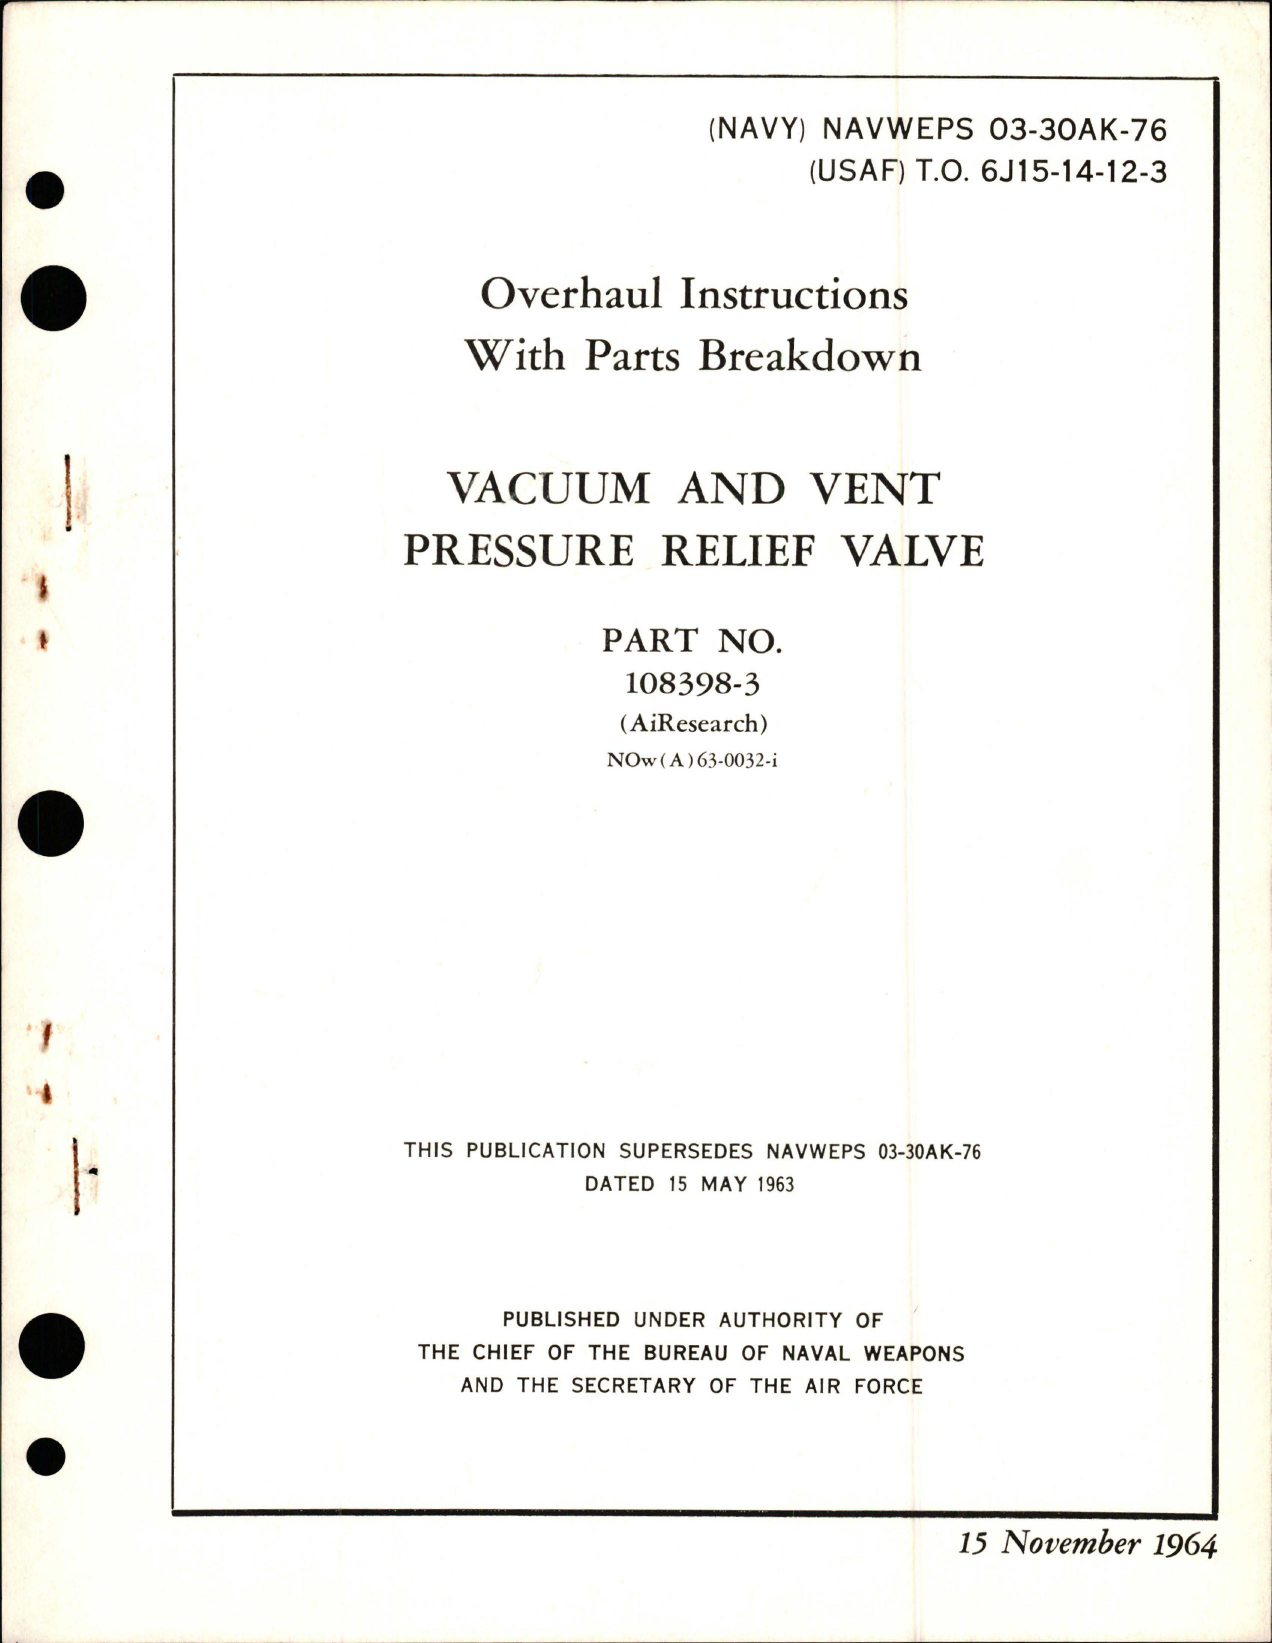 Sample page 1 from AirCorps Library document: Overhaul Instructions with Parts Breakdown for Vacuum and Vent Pressure Relief Valve - Part 108398-3